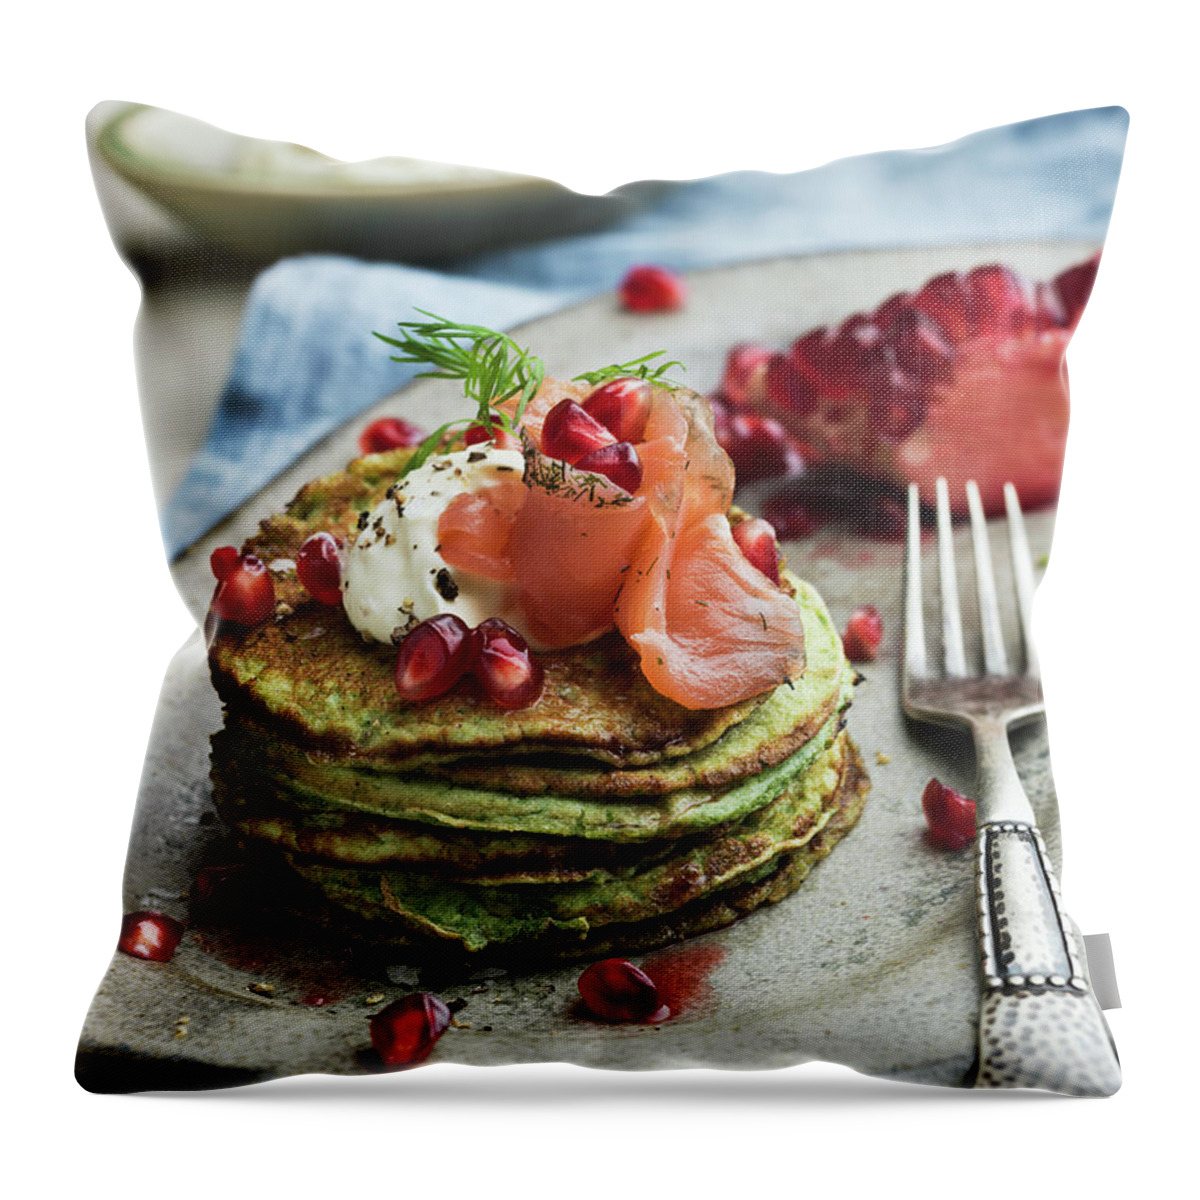 Sweden Throw Pillow featuring the photograph Pancakes With Salmon, Sweden by Johner Images